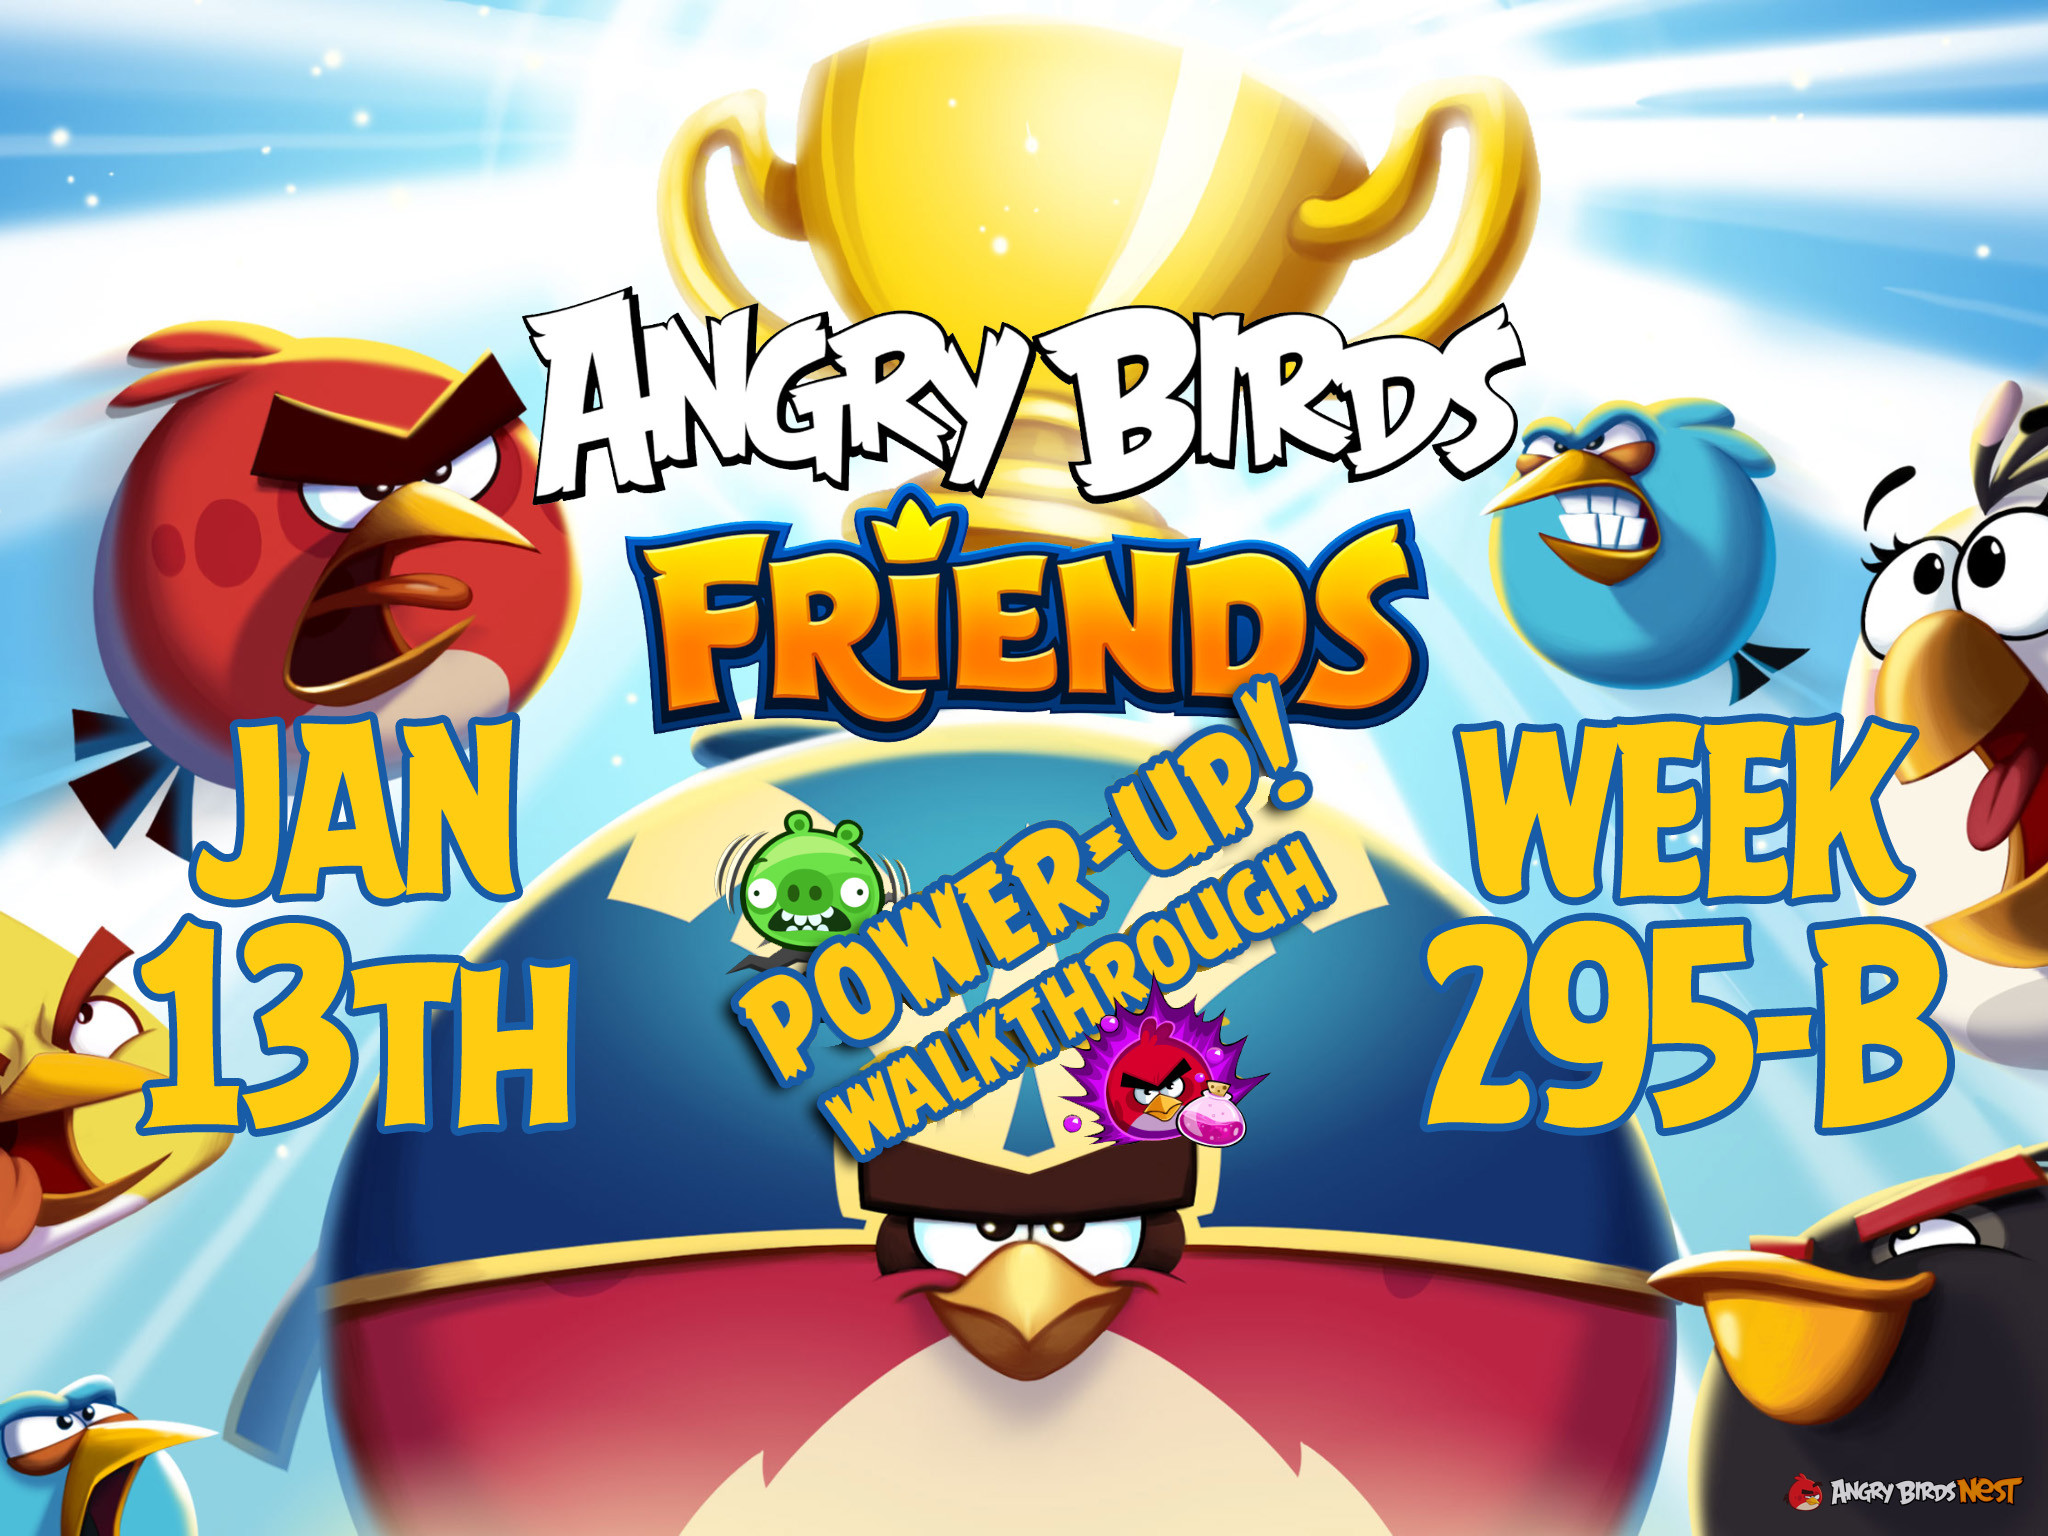 Angry Birds Friends Tournament Week 295-B Feature Image PU